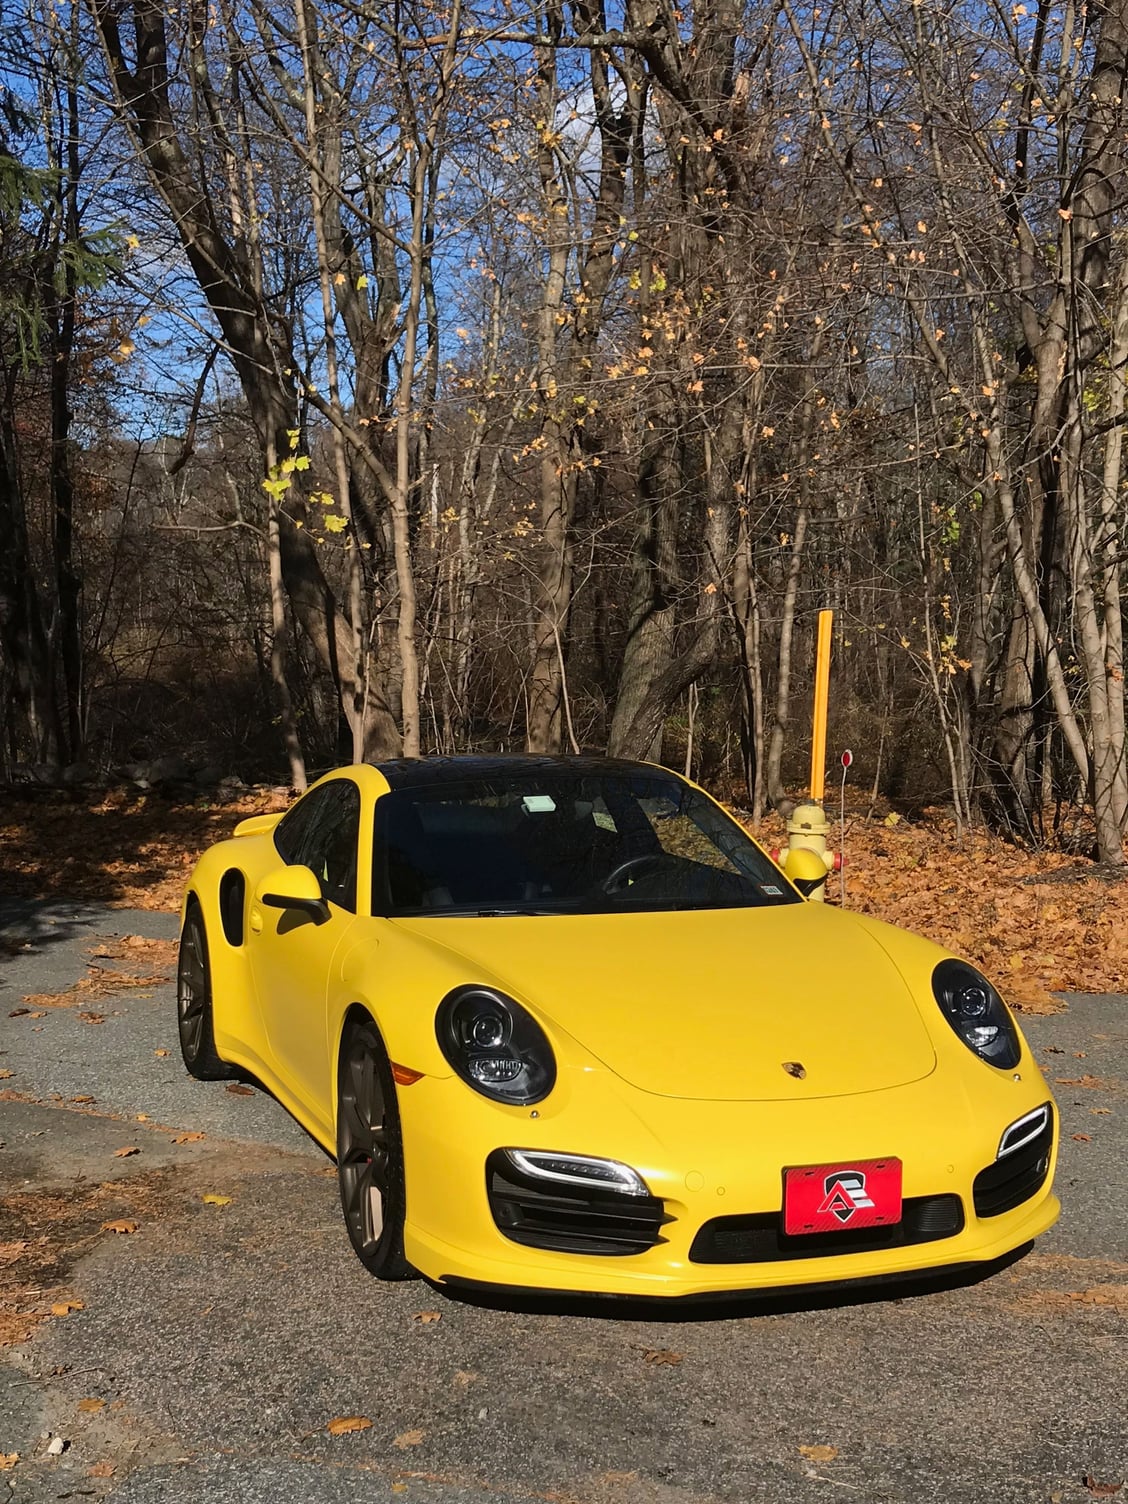 Paint Protection and Ceramic Coatings - Automotive Elegance - 22 Dale St. Andover, MA 01810, United States